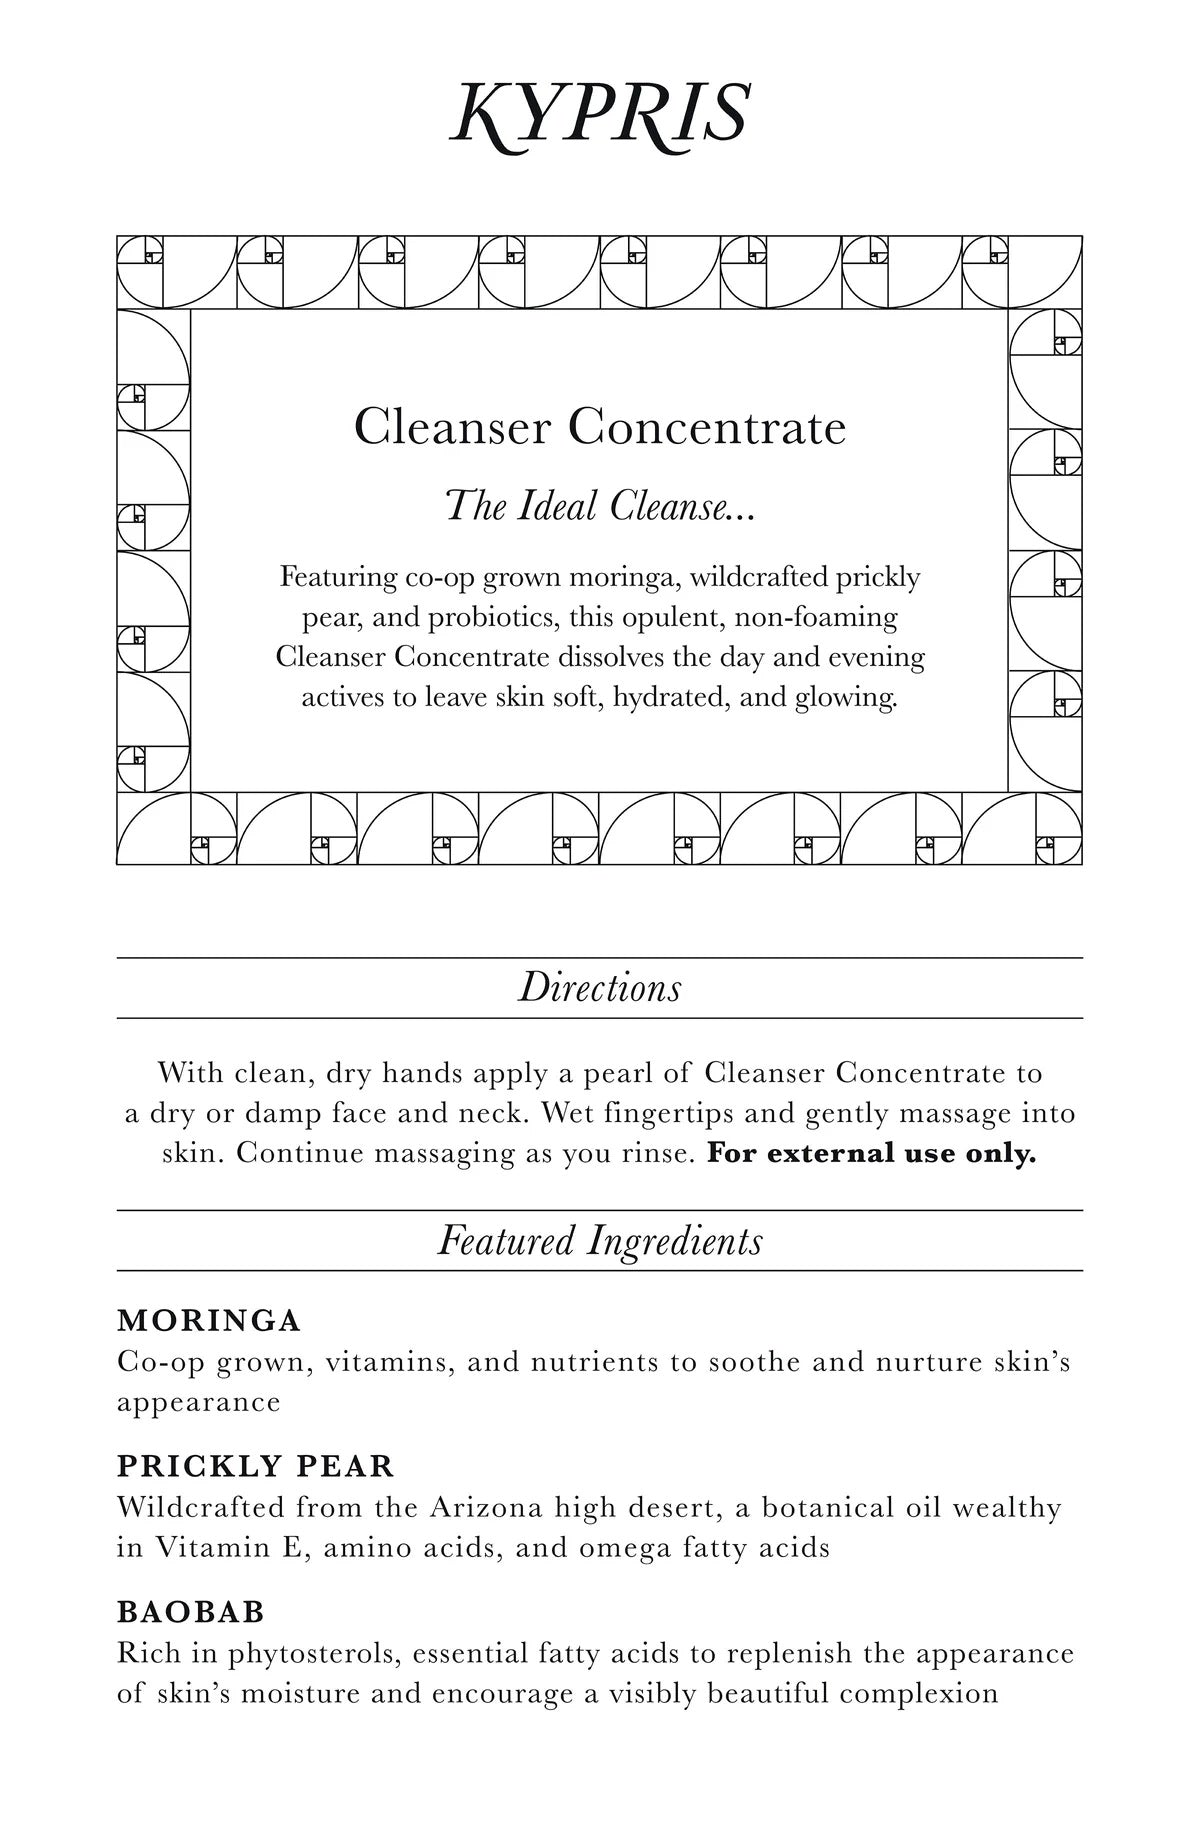 Kypris Cleanser Concentrate Information